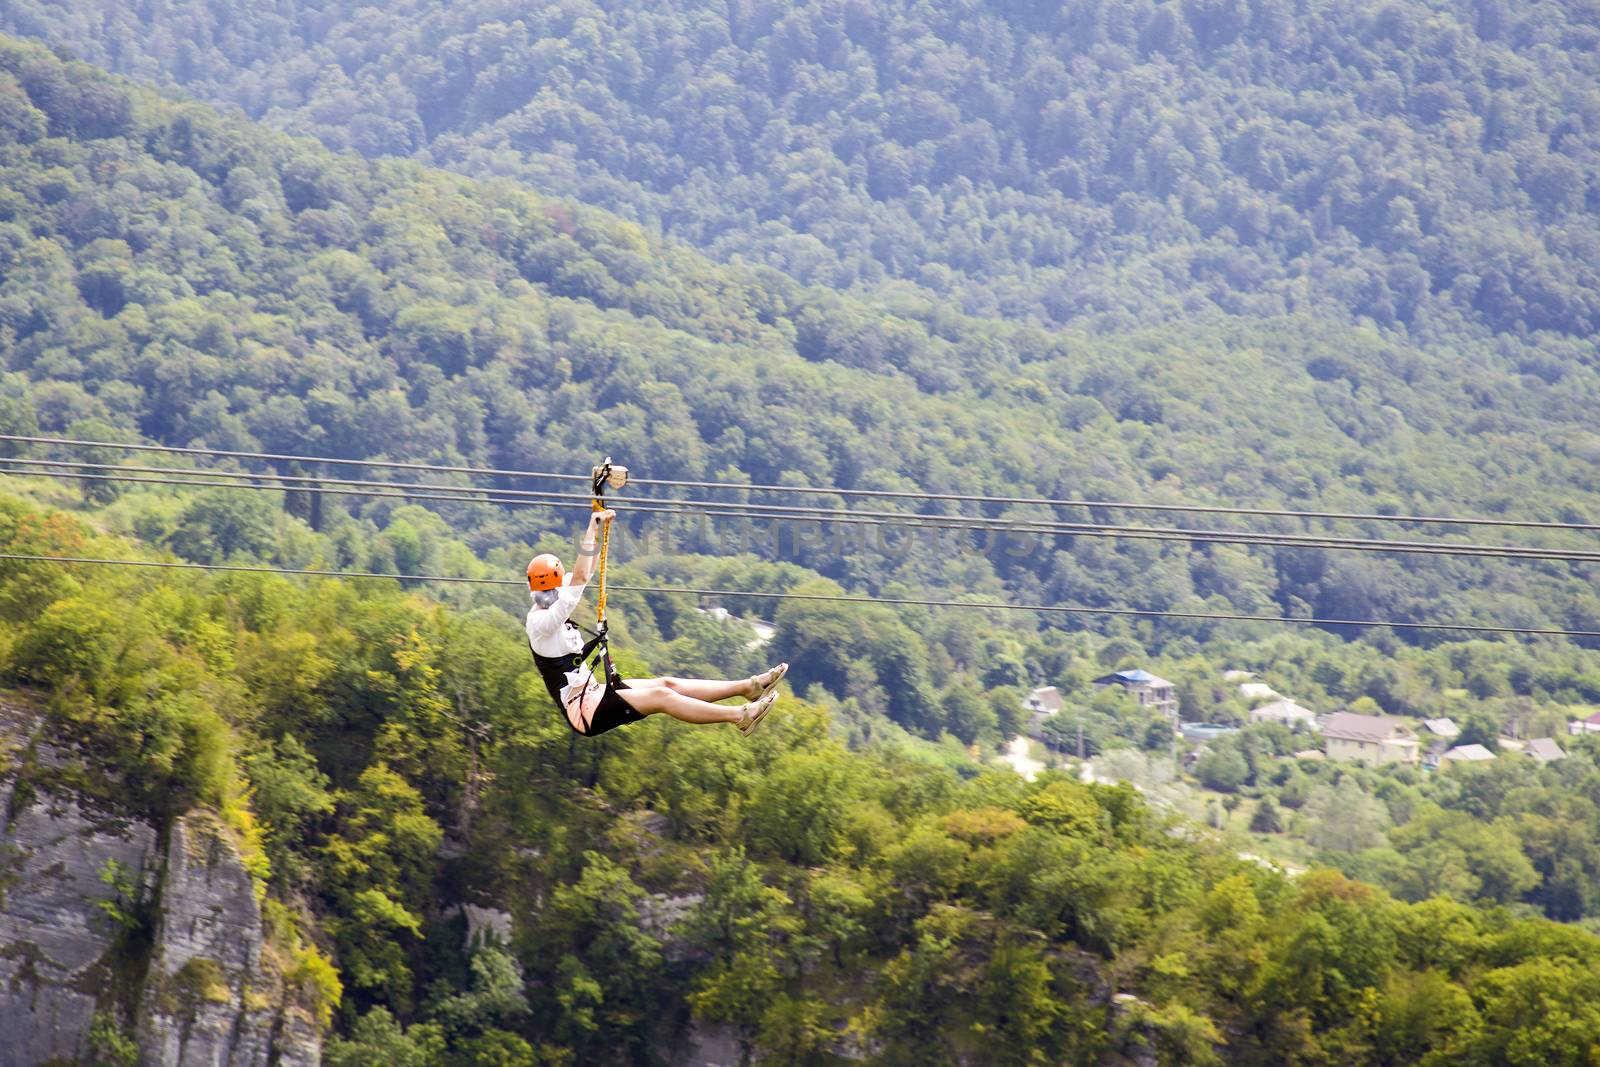 Man and woman hanging on a rope-way. Couple in helmets is riding on a cable car. Zipline is an exciting adventure activity.